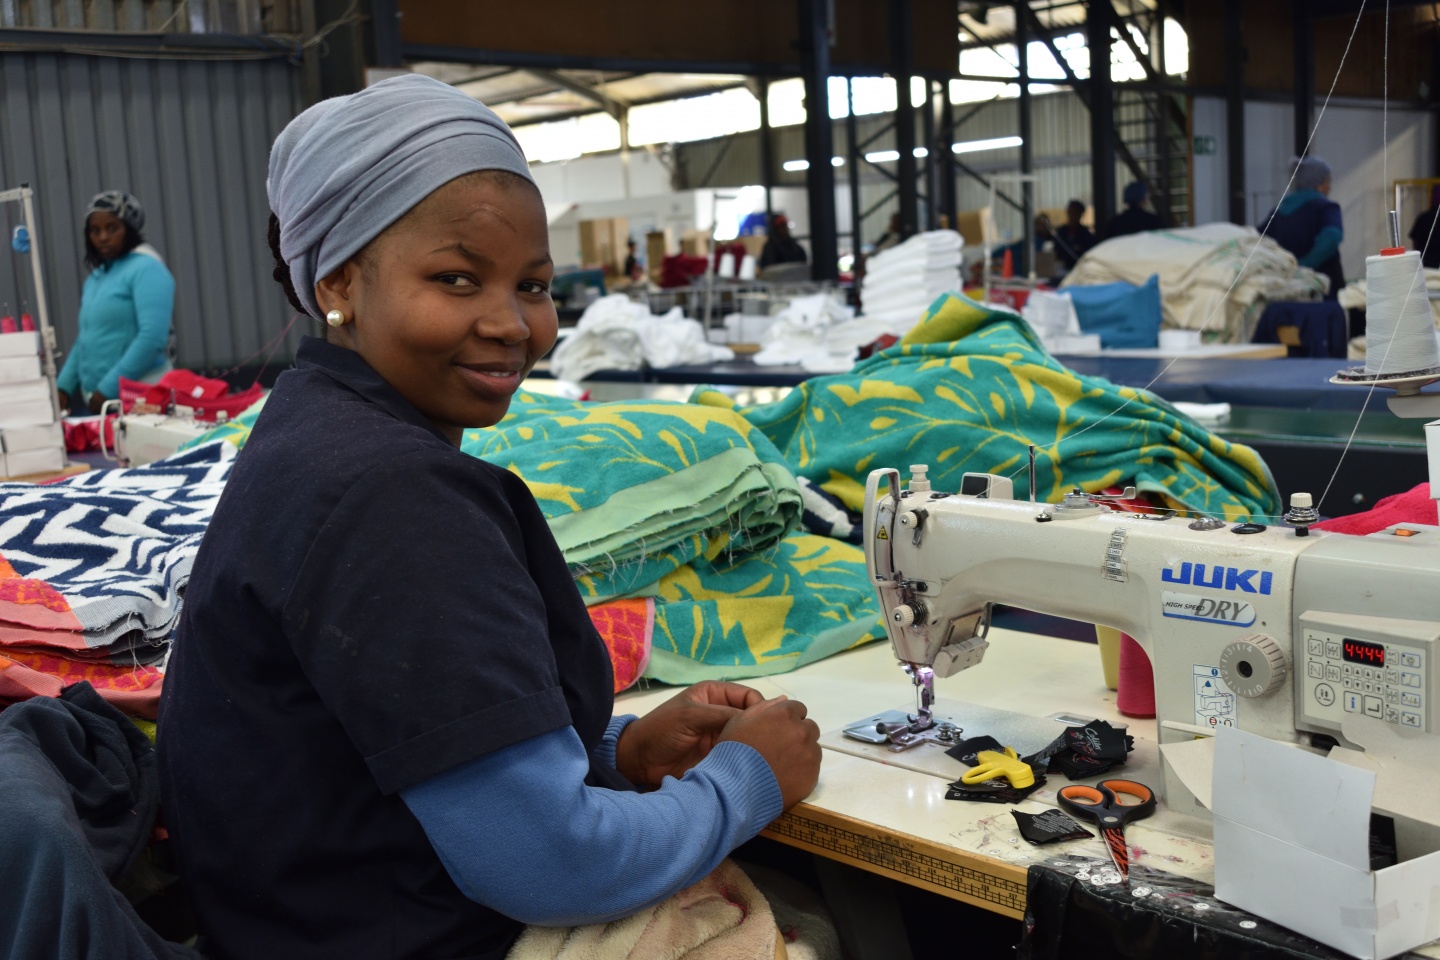 Unions discuss revival of the textile and garment sector in Africa